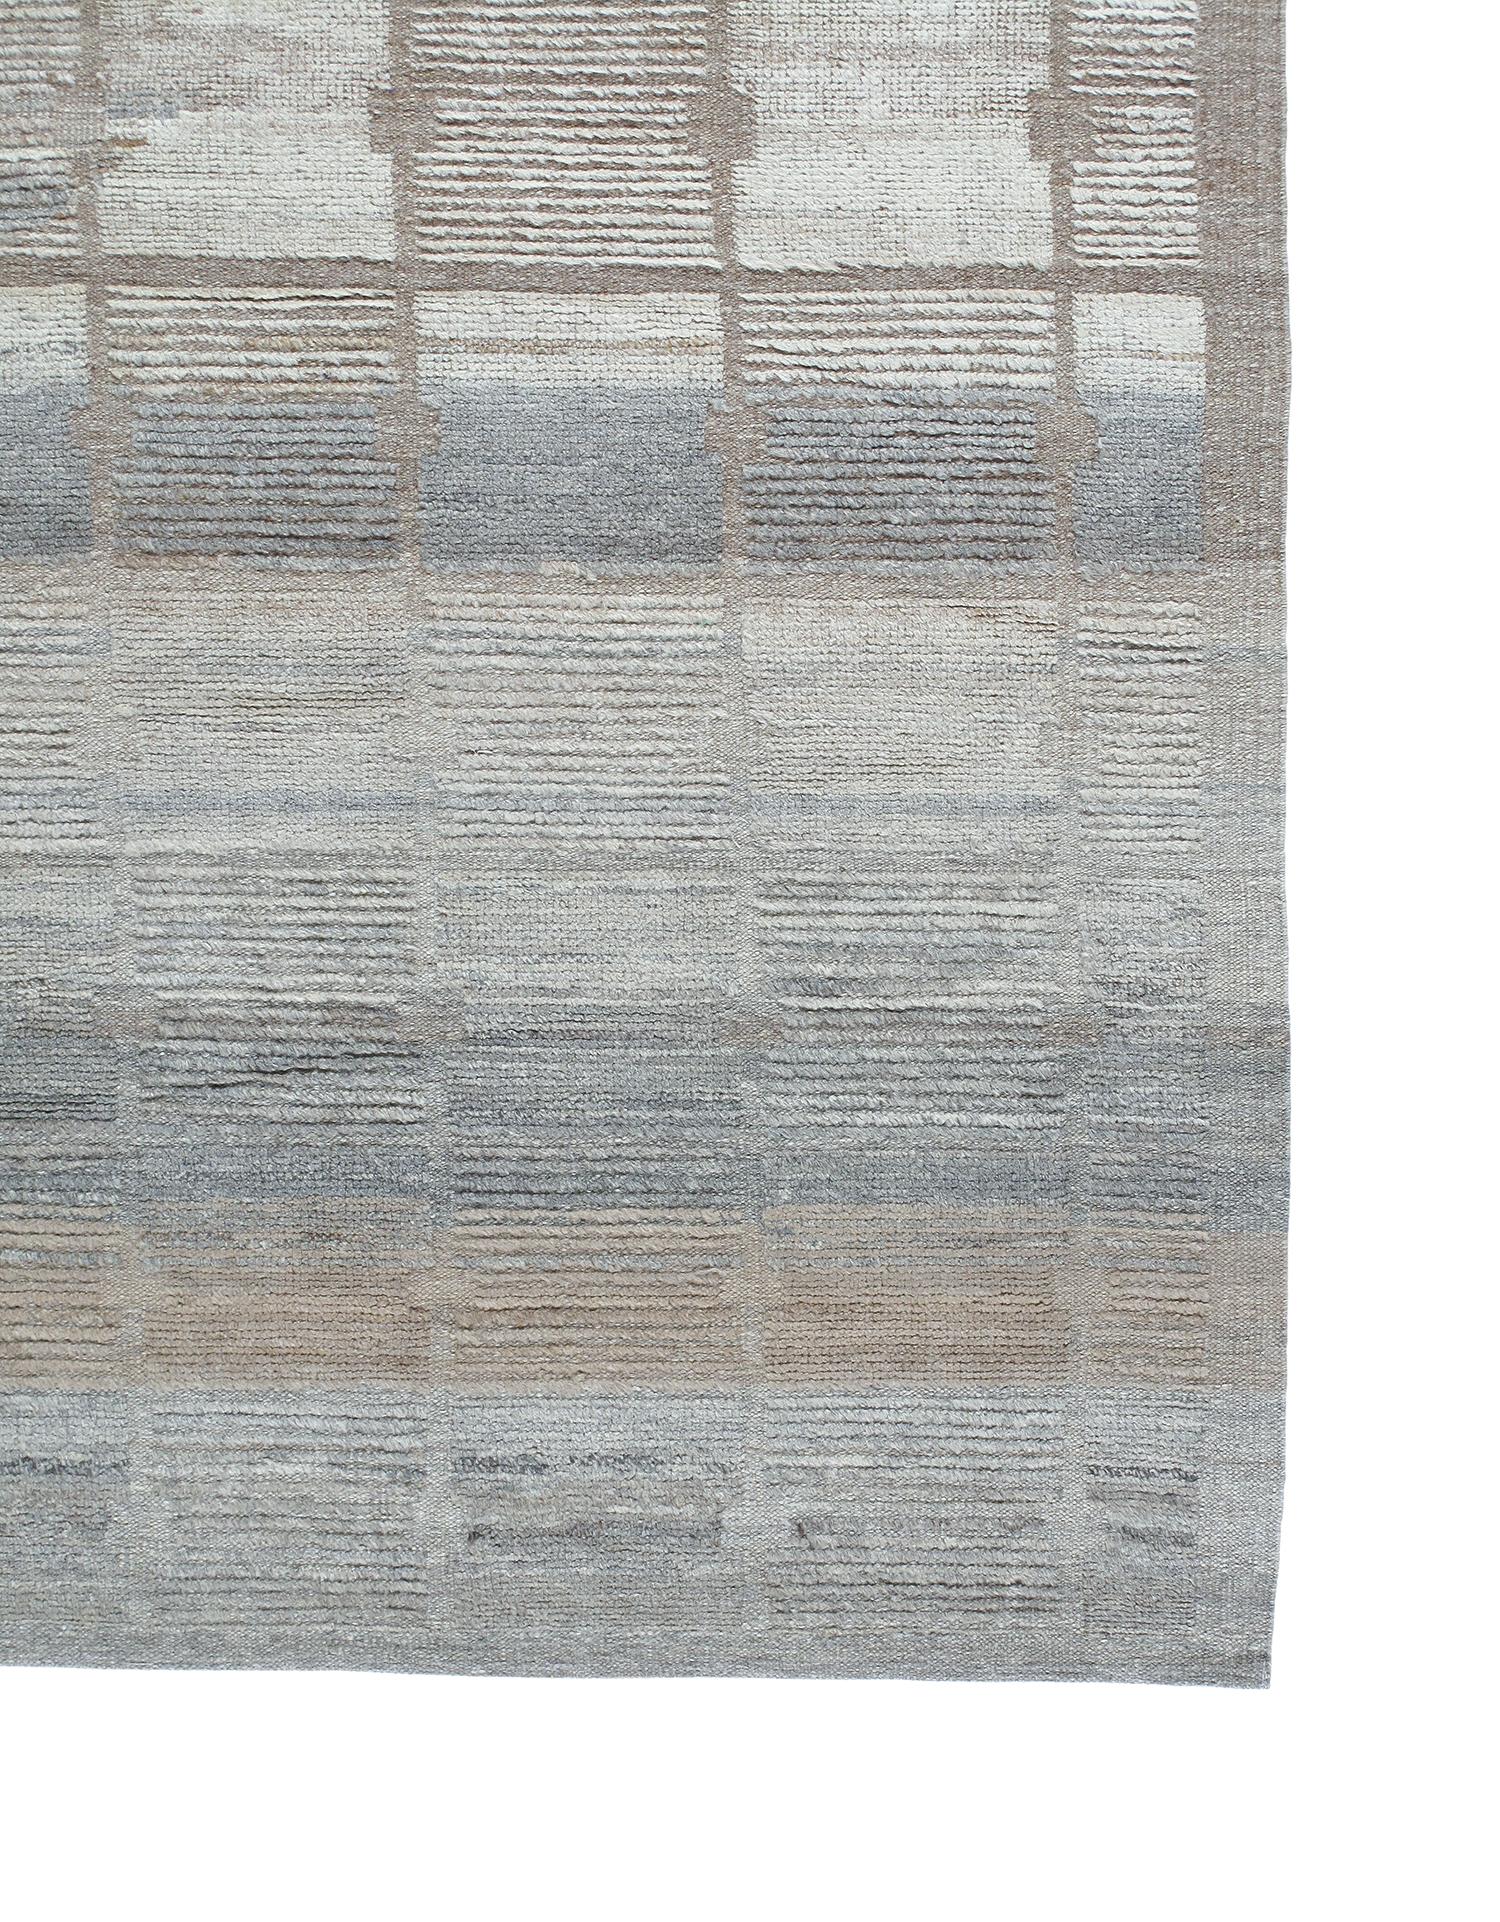 Wool Modern Textured Simple Dsign Hand Knotted Rug For Sale